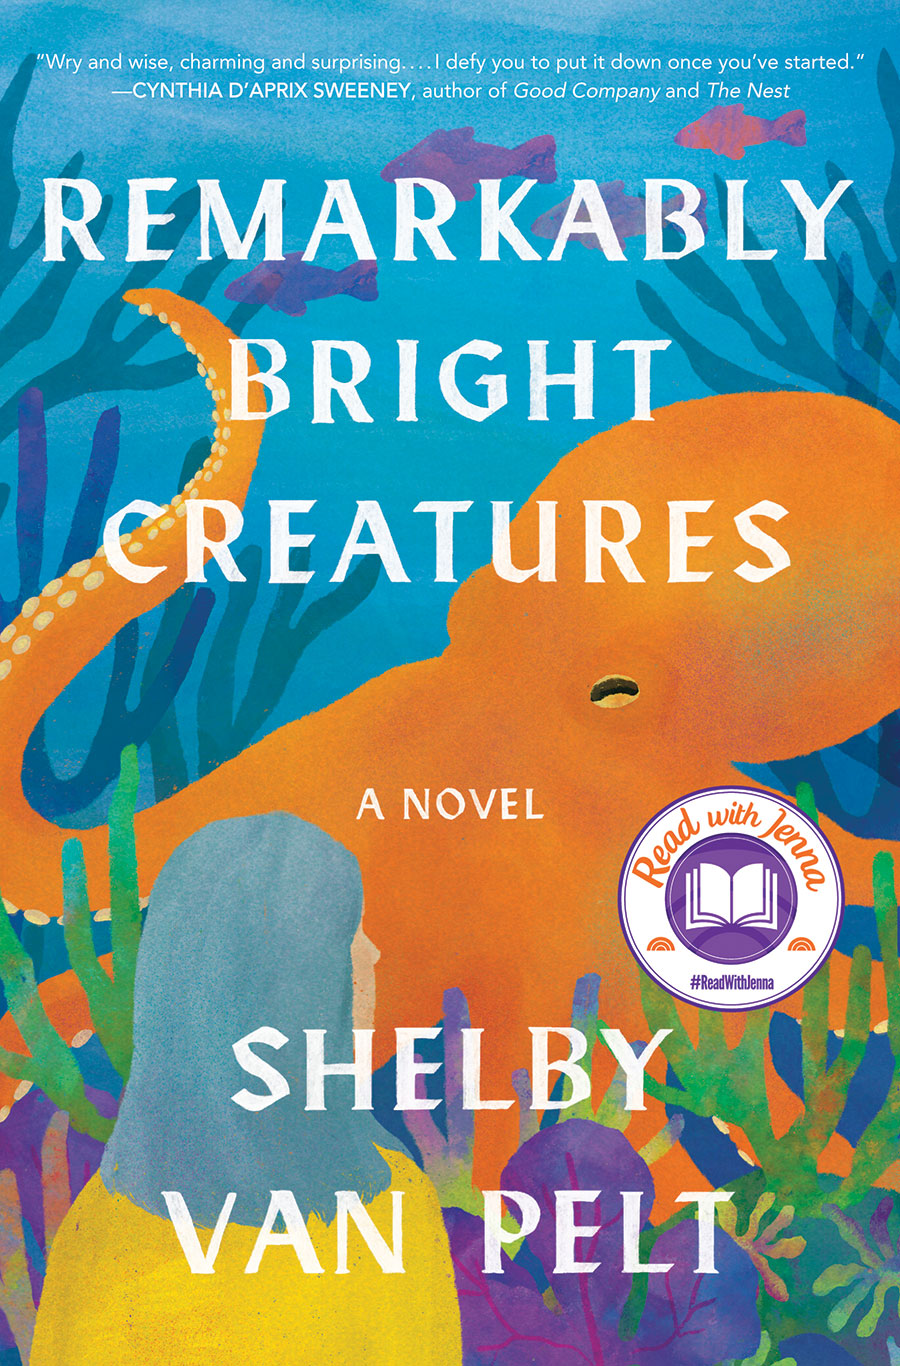 Image of "Remarkably Bright Creatures"